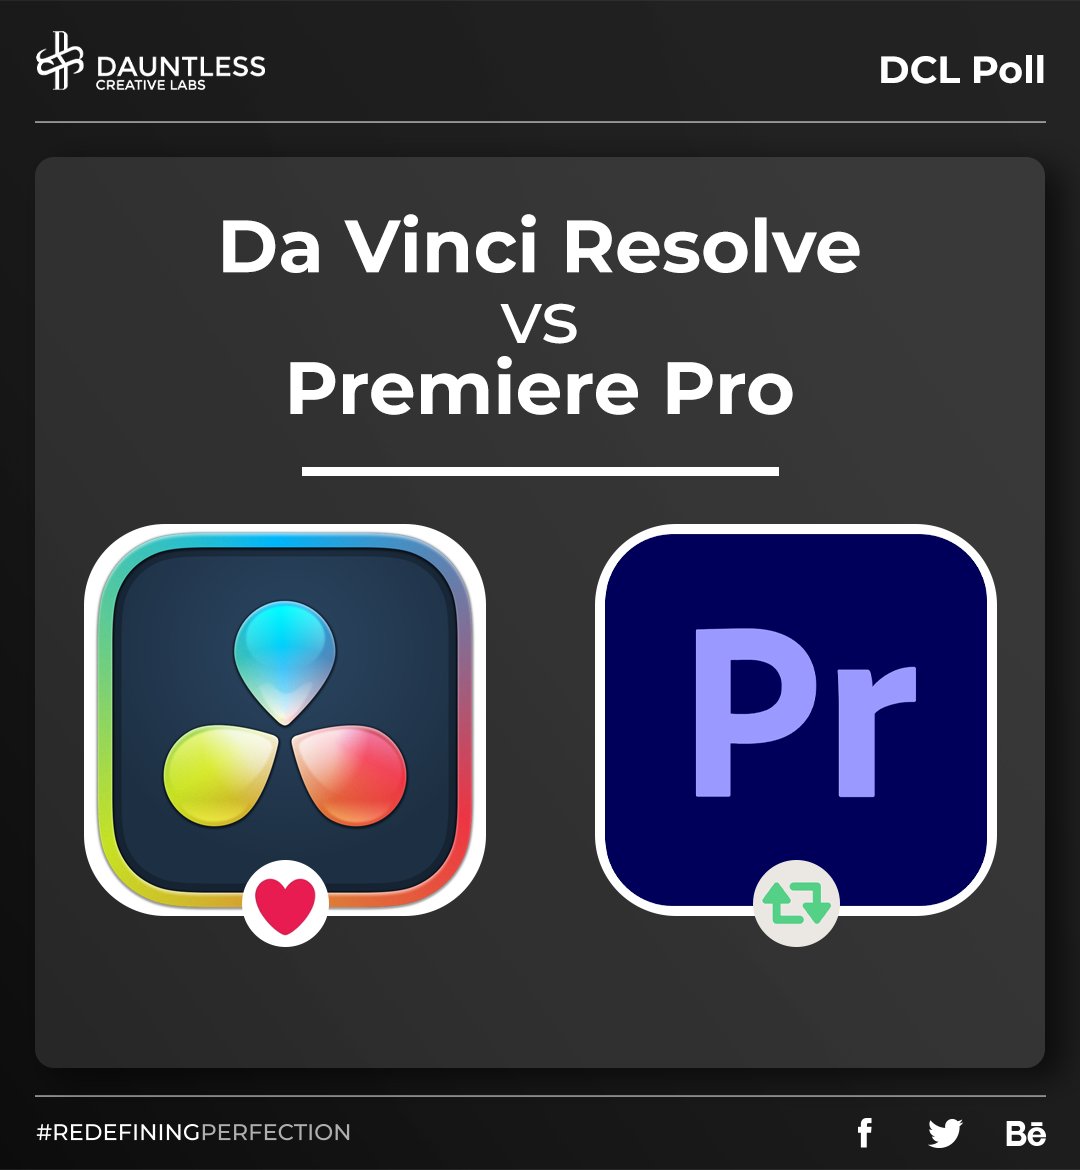 Lights, camera, action! It's time to dive into the world of video editing and color grading. Which software reigns supreme: Da Vinci Resolve or Premiere Pro? Vote for your favorite and let us know why in the comments below! 

#BeDauntless #RedefiningPerfection